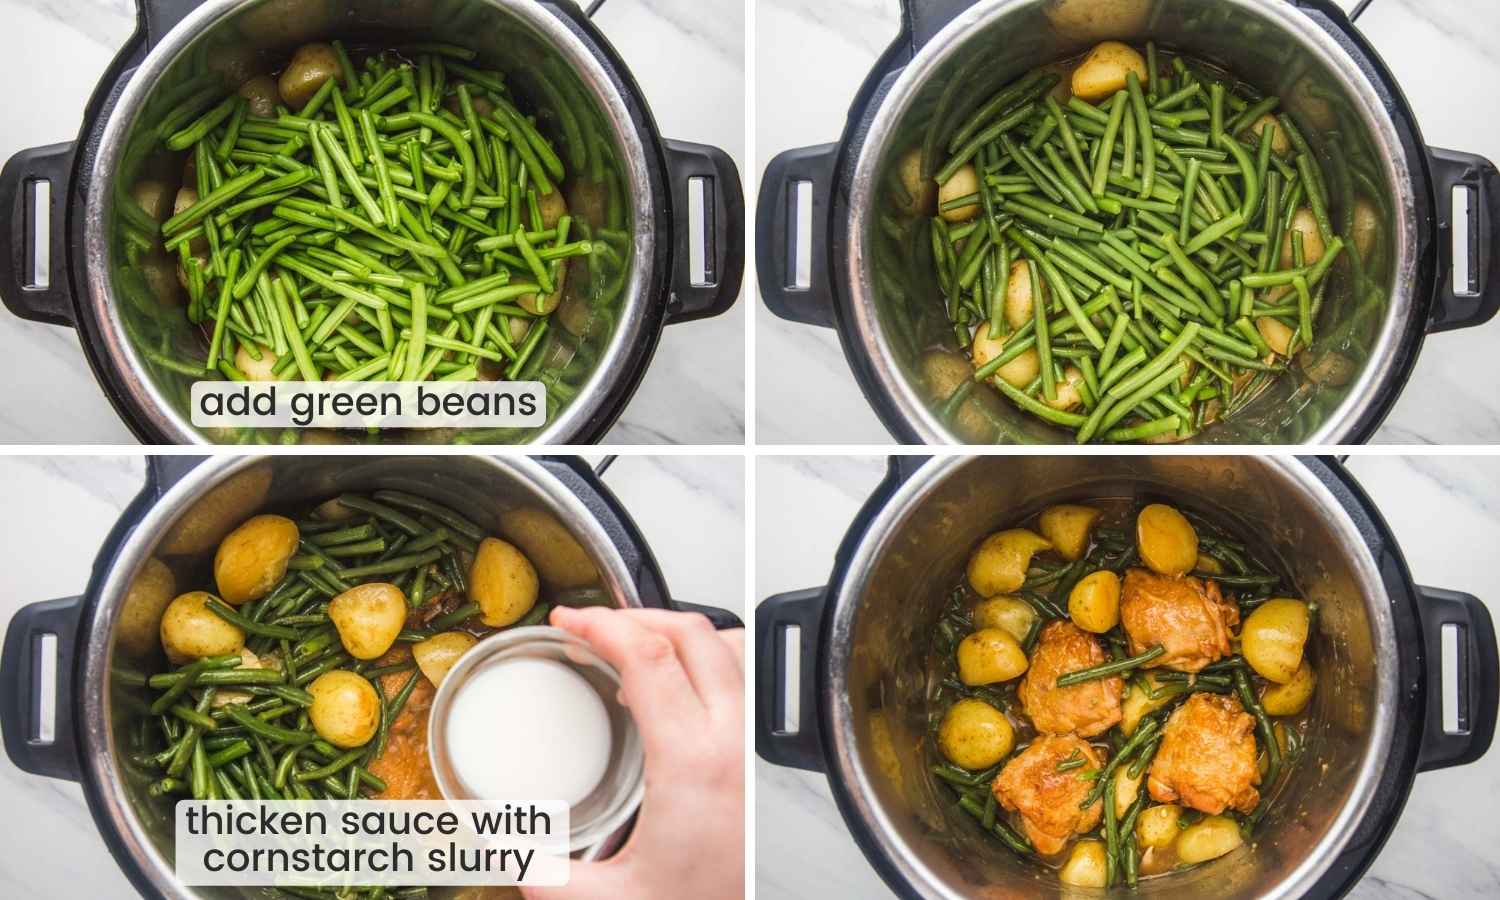 Collage of four images showing how to add green beans to the chicken, then thicken the sauce with cornstarch slurry.